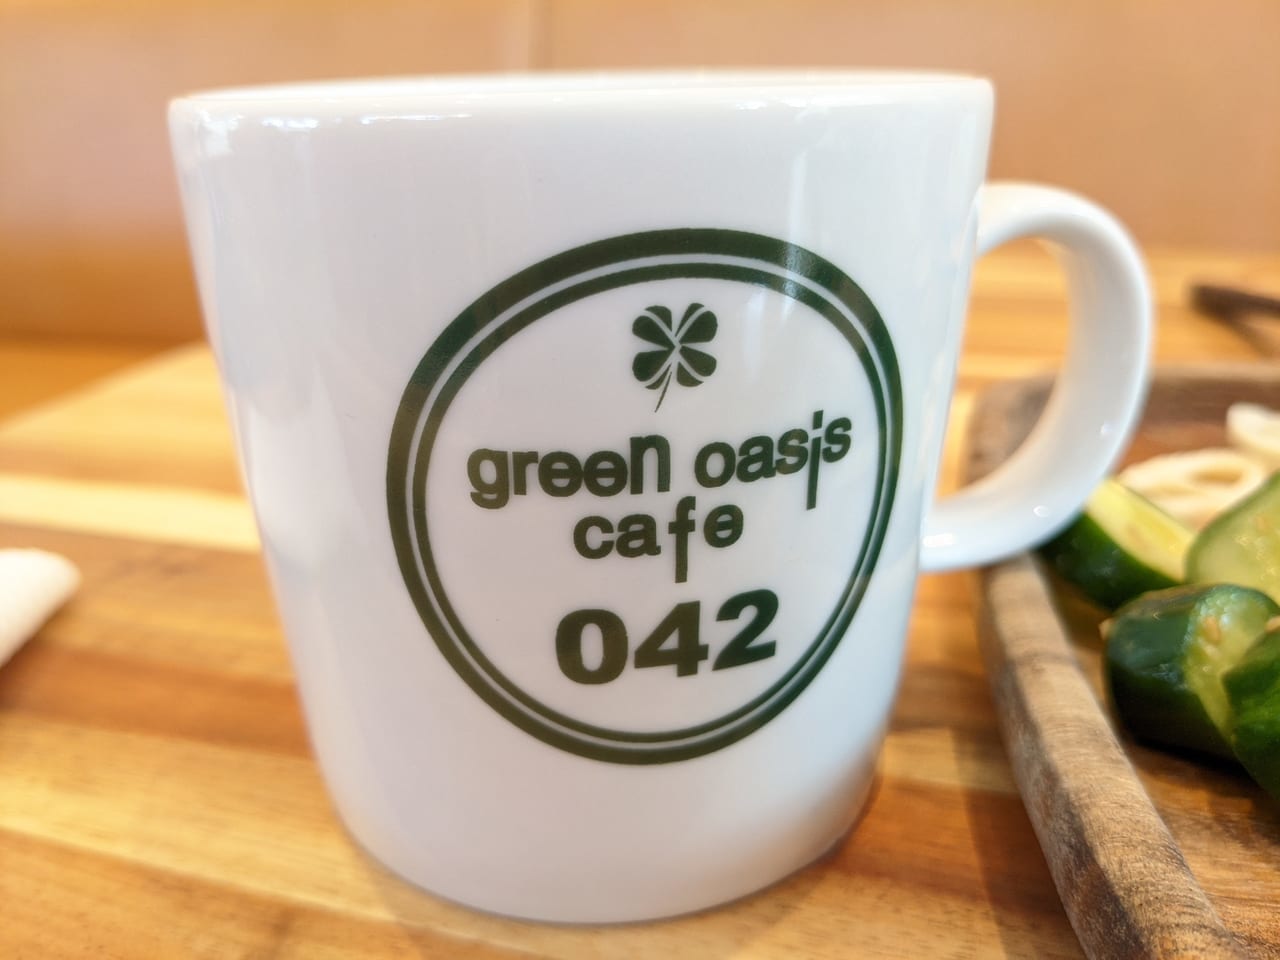 green oasis cafe 042